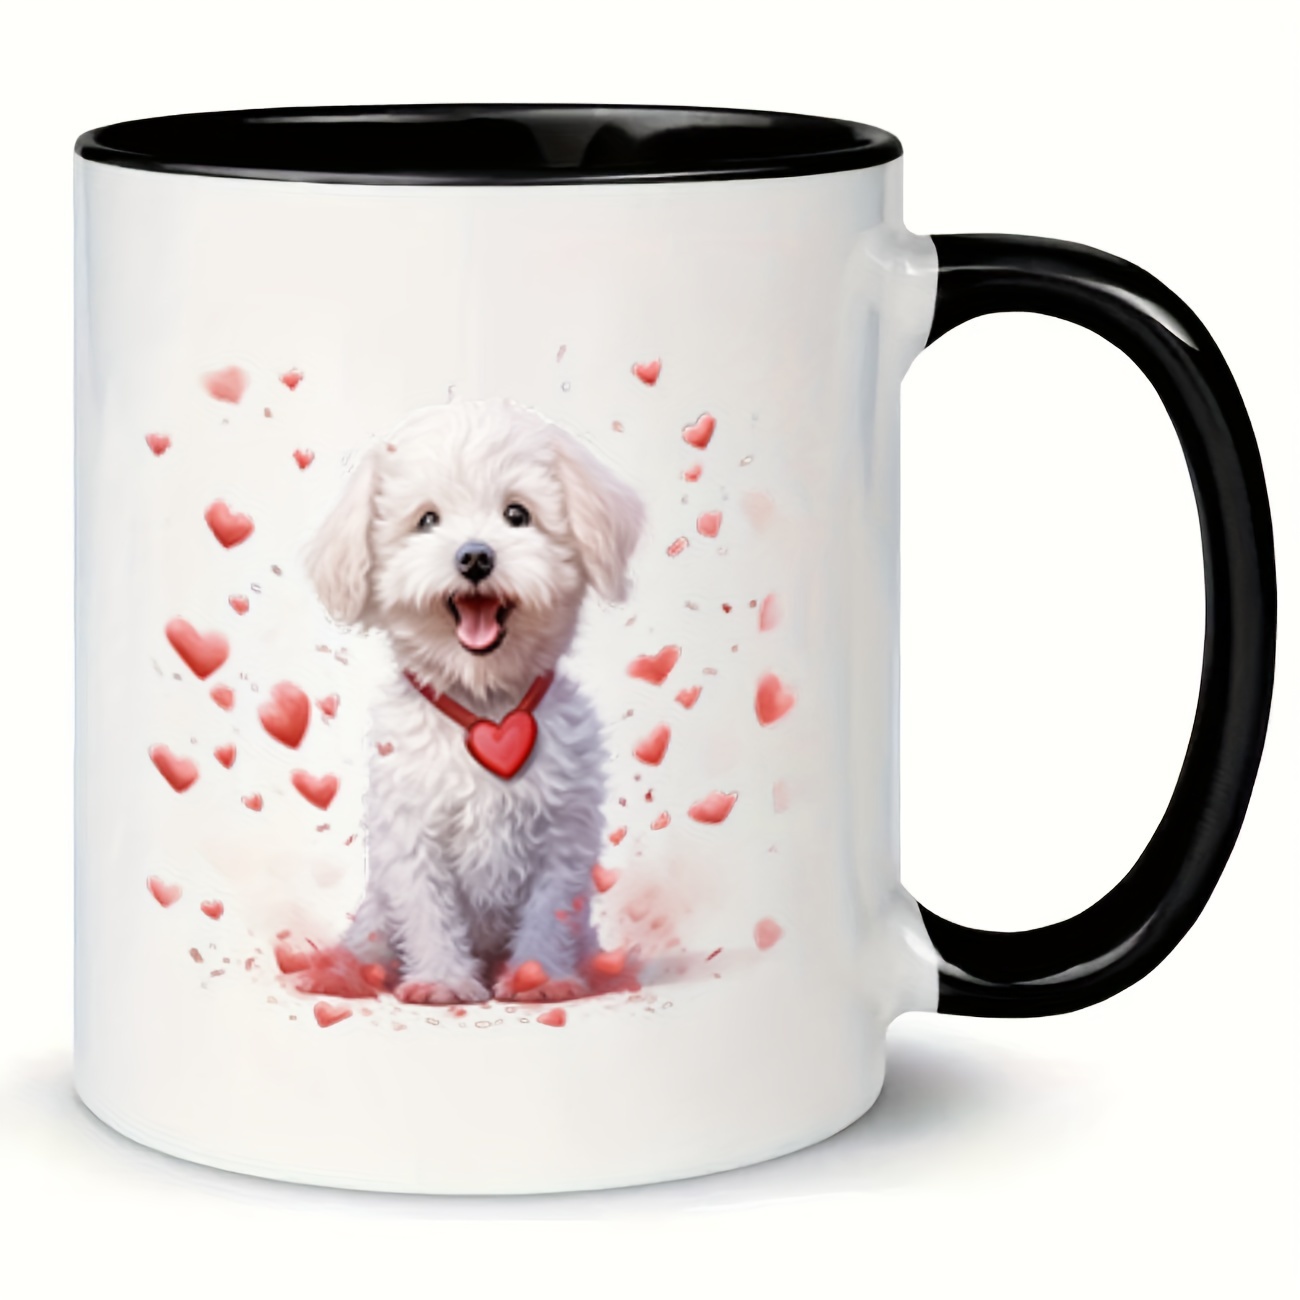 

Bichon Frise Ceramic Coffee Mug 11oz - Dishwasher & Microwave Safe - Adorable Dog Design Home Office Cup For Coffee Enthusiasts, Perfect Gift For Pet Lovers, Family & Friends